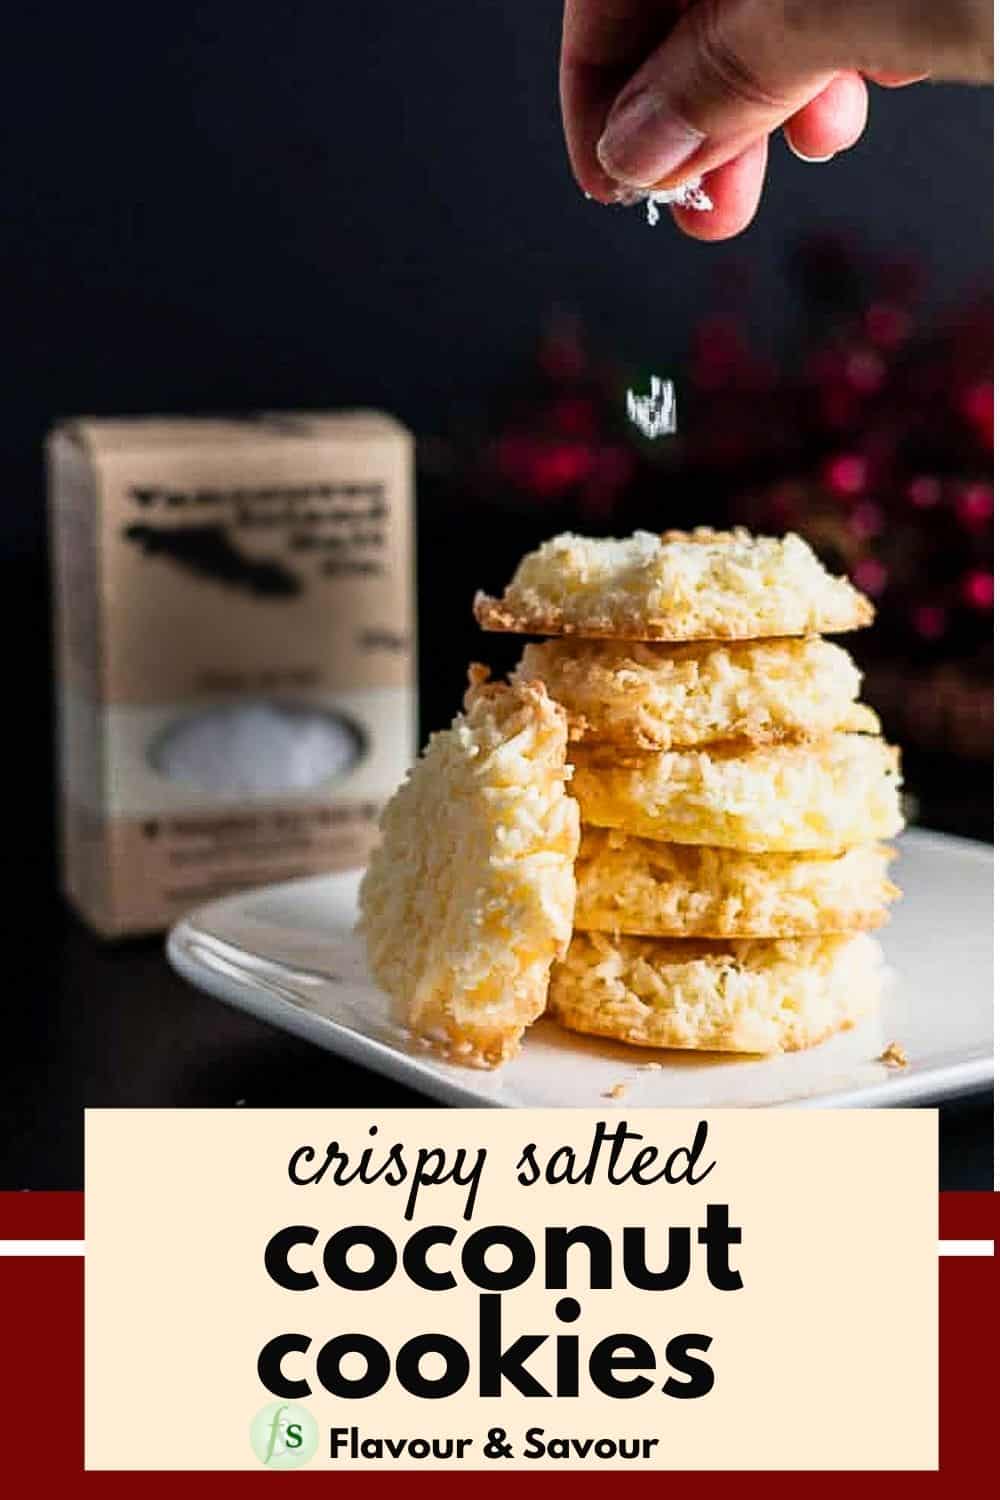 text and image for crispy salted coconut cookies